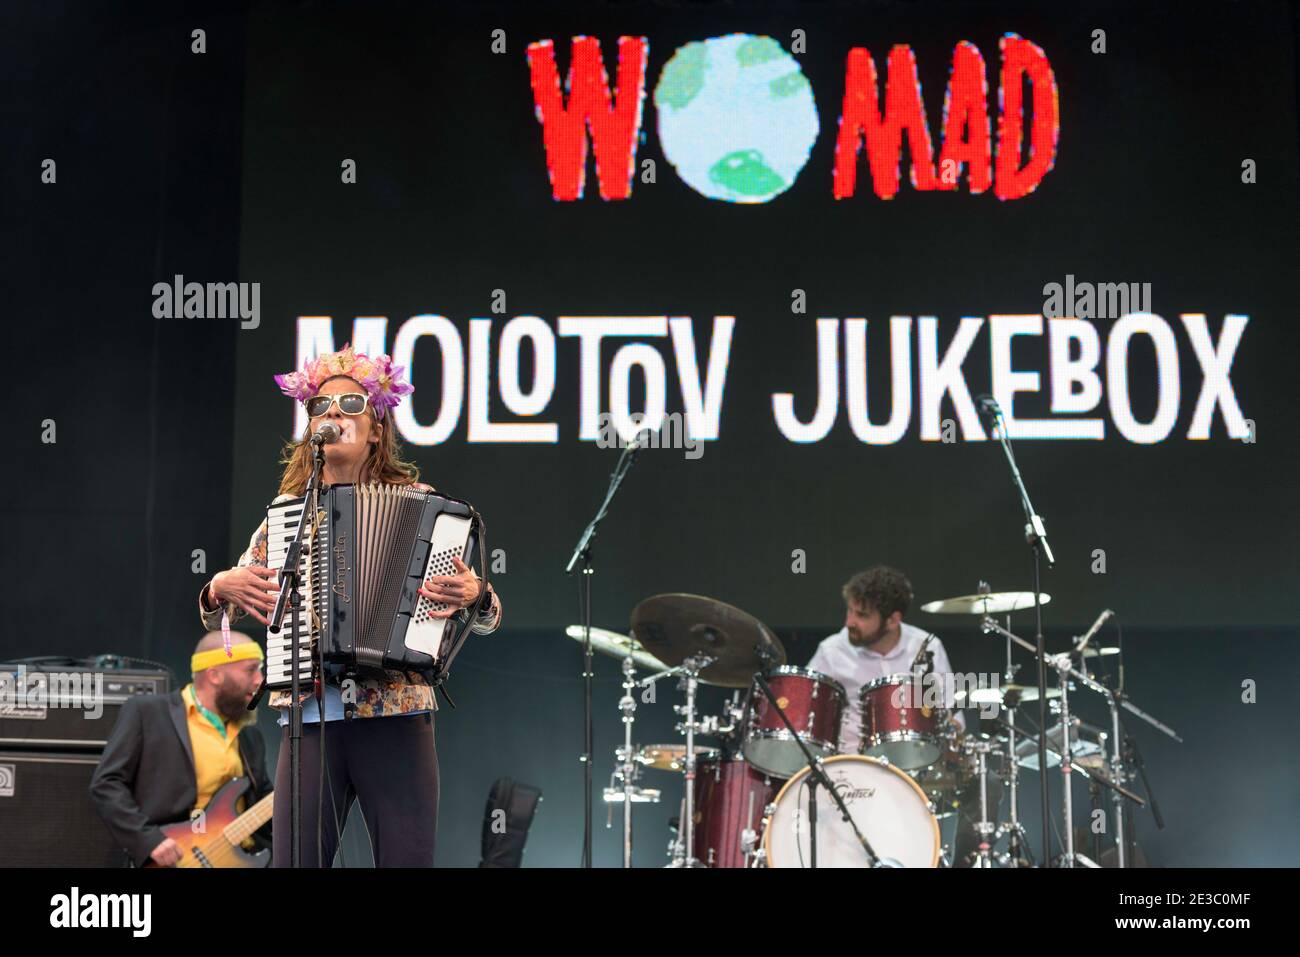 Molotov Jukebox performing at the Womad Festival, Charlton Park, UK. July 24, 2015 Stock Photo